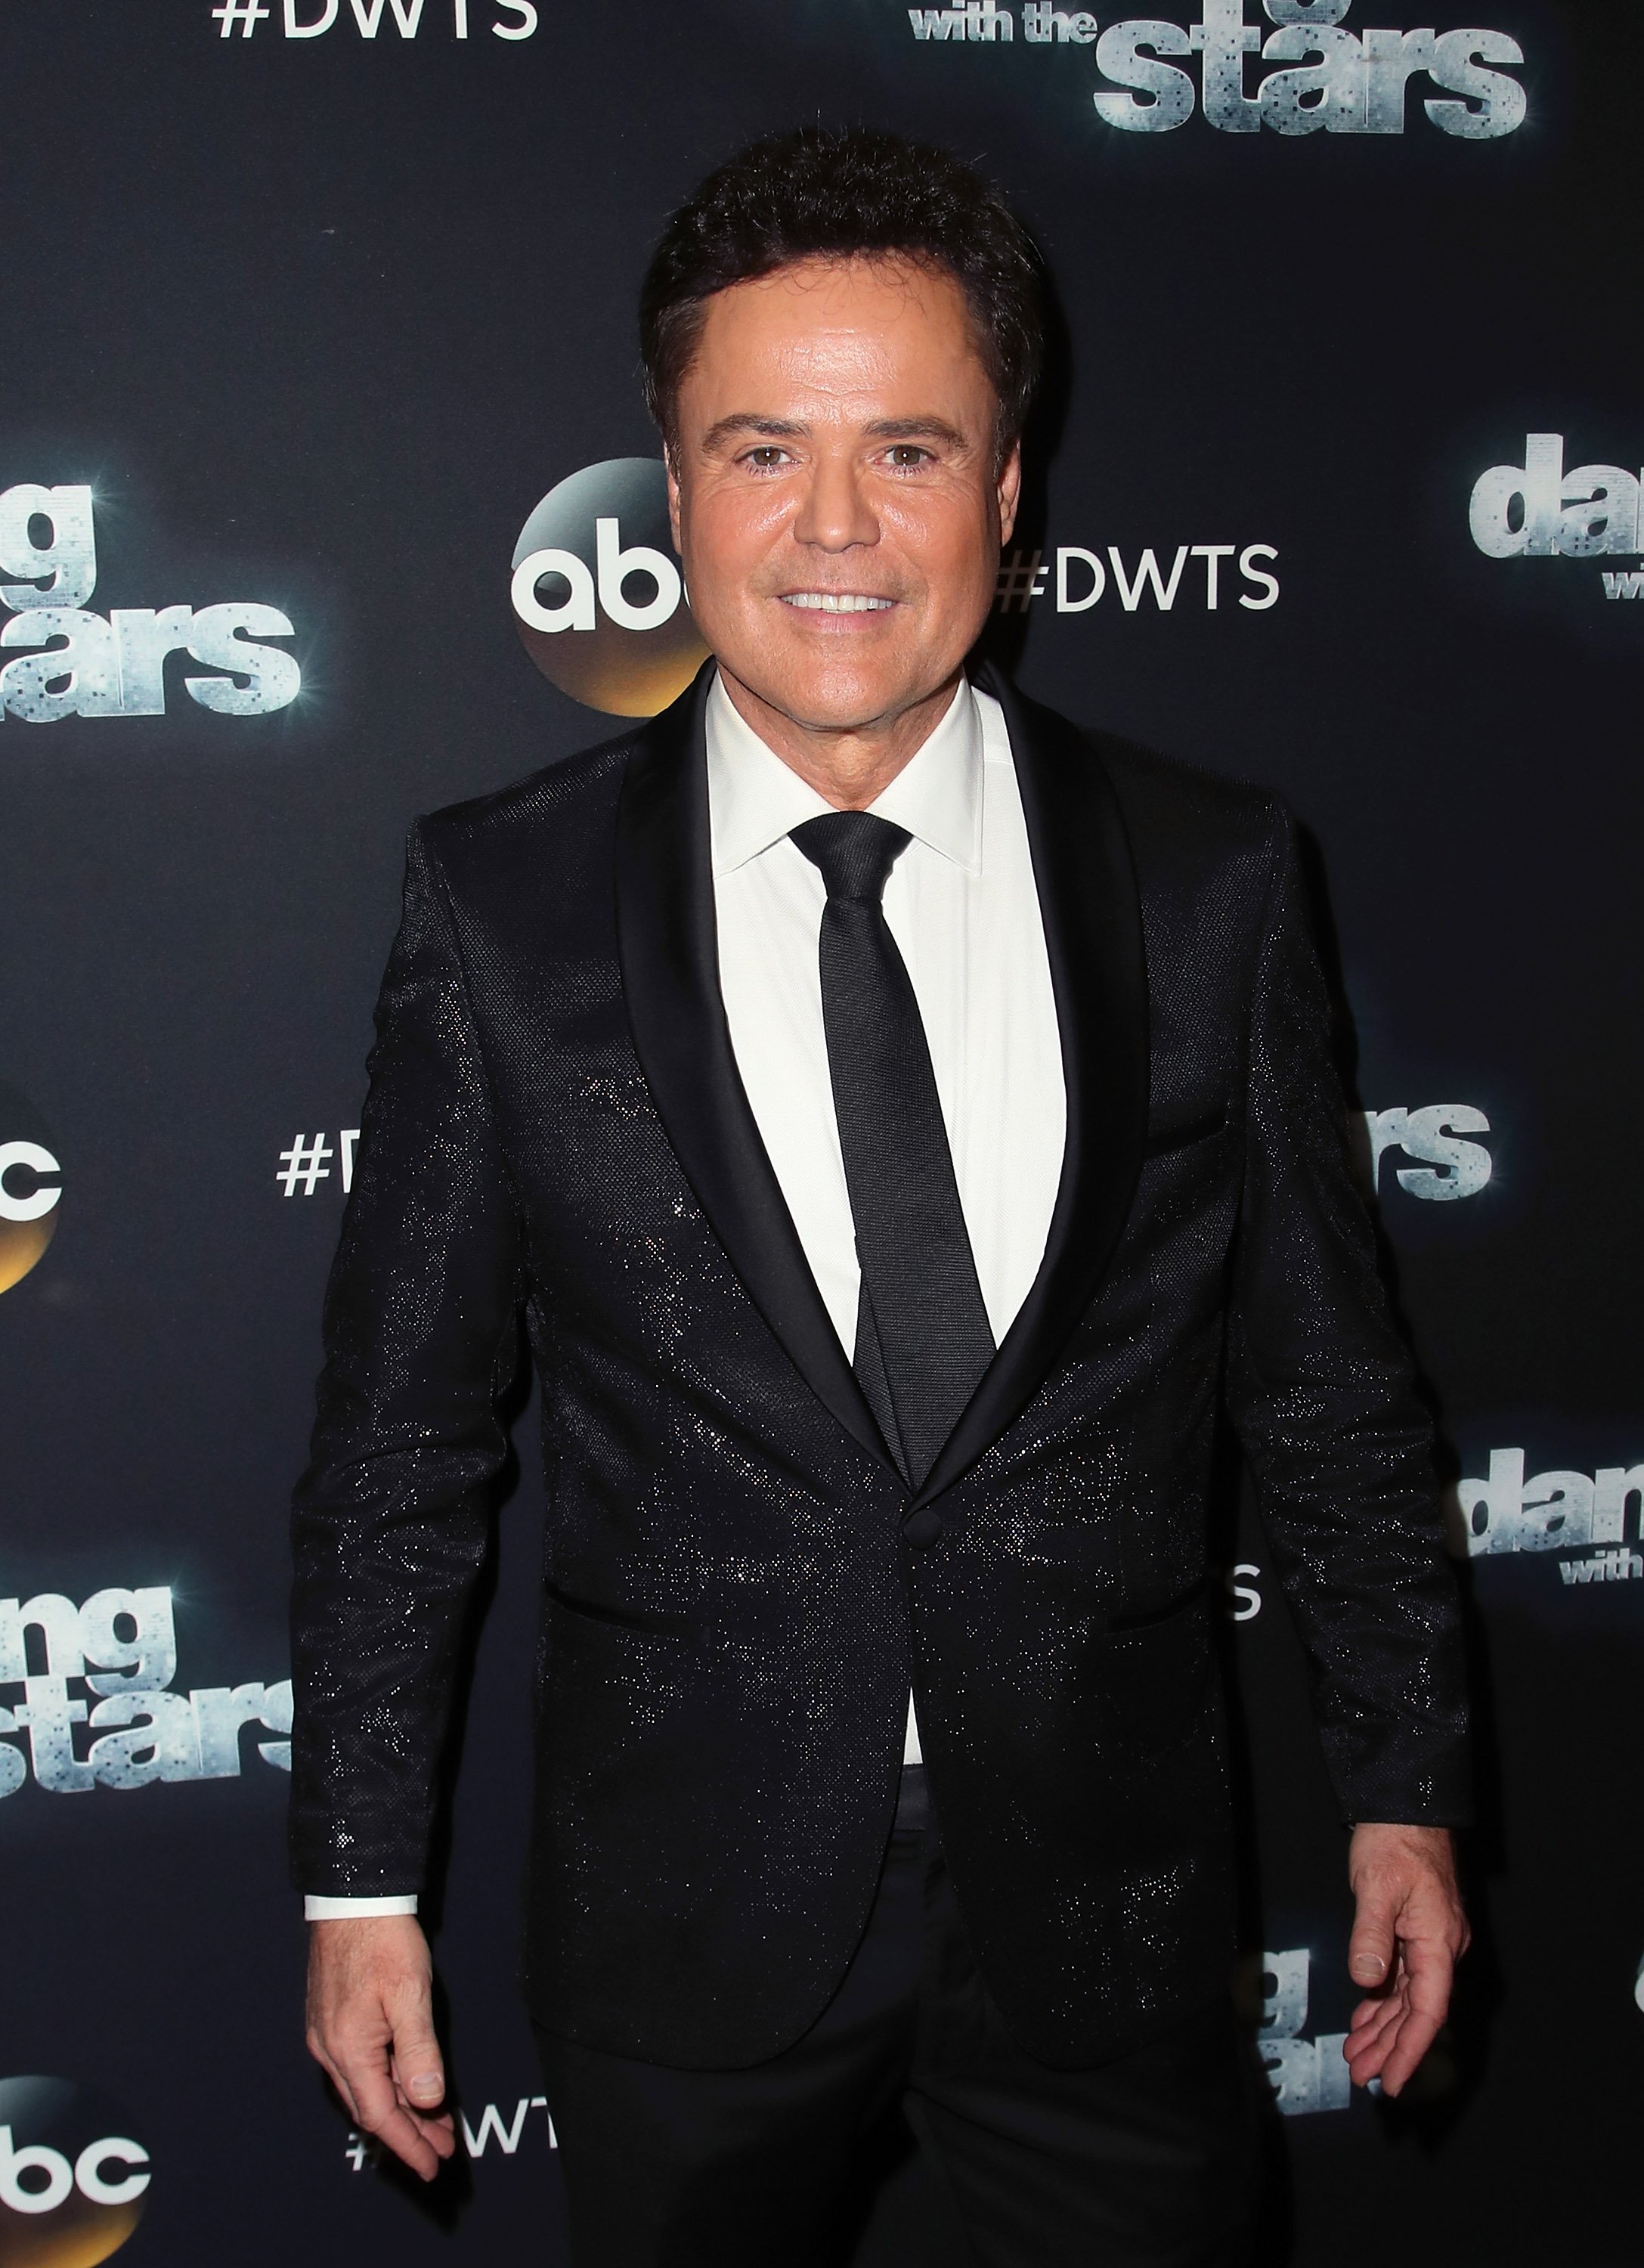 Donny Osmond pictured at the Dancing with the Stars" Season 24 at CBS Televison City, 2017, California. | Photo: Getty Image